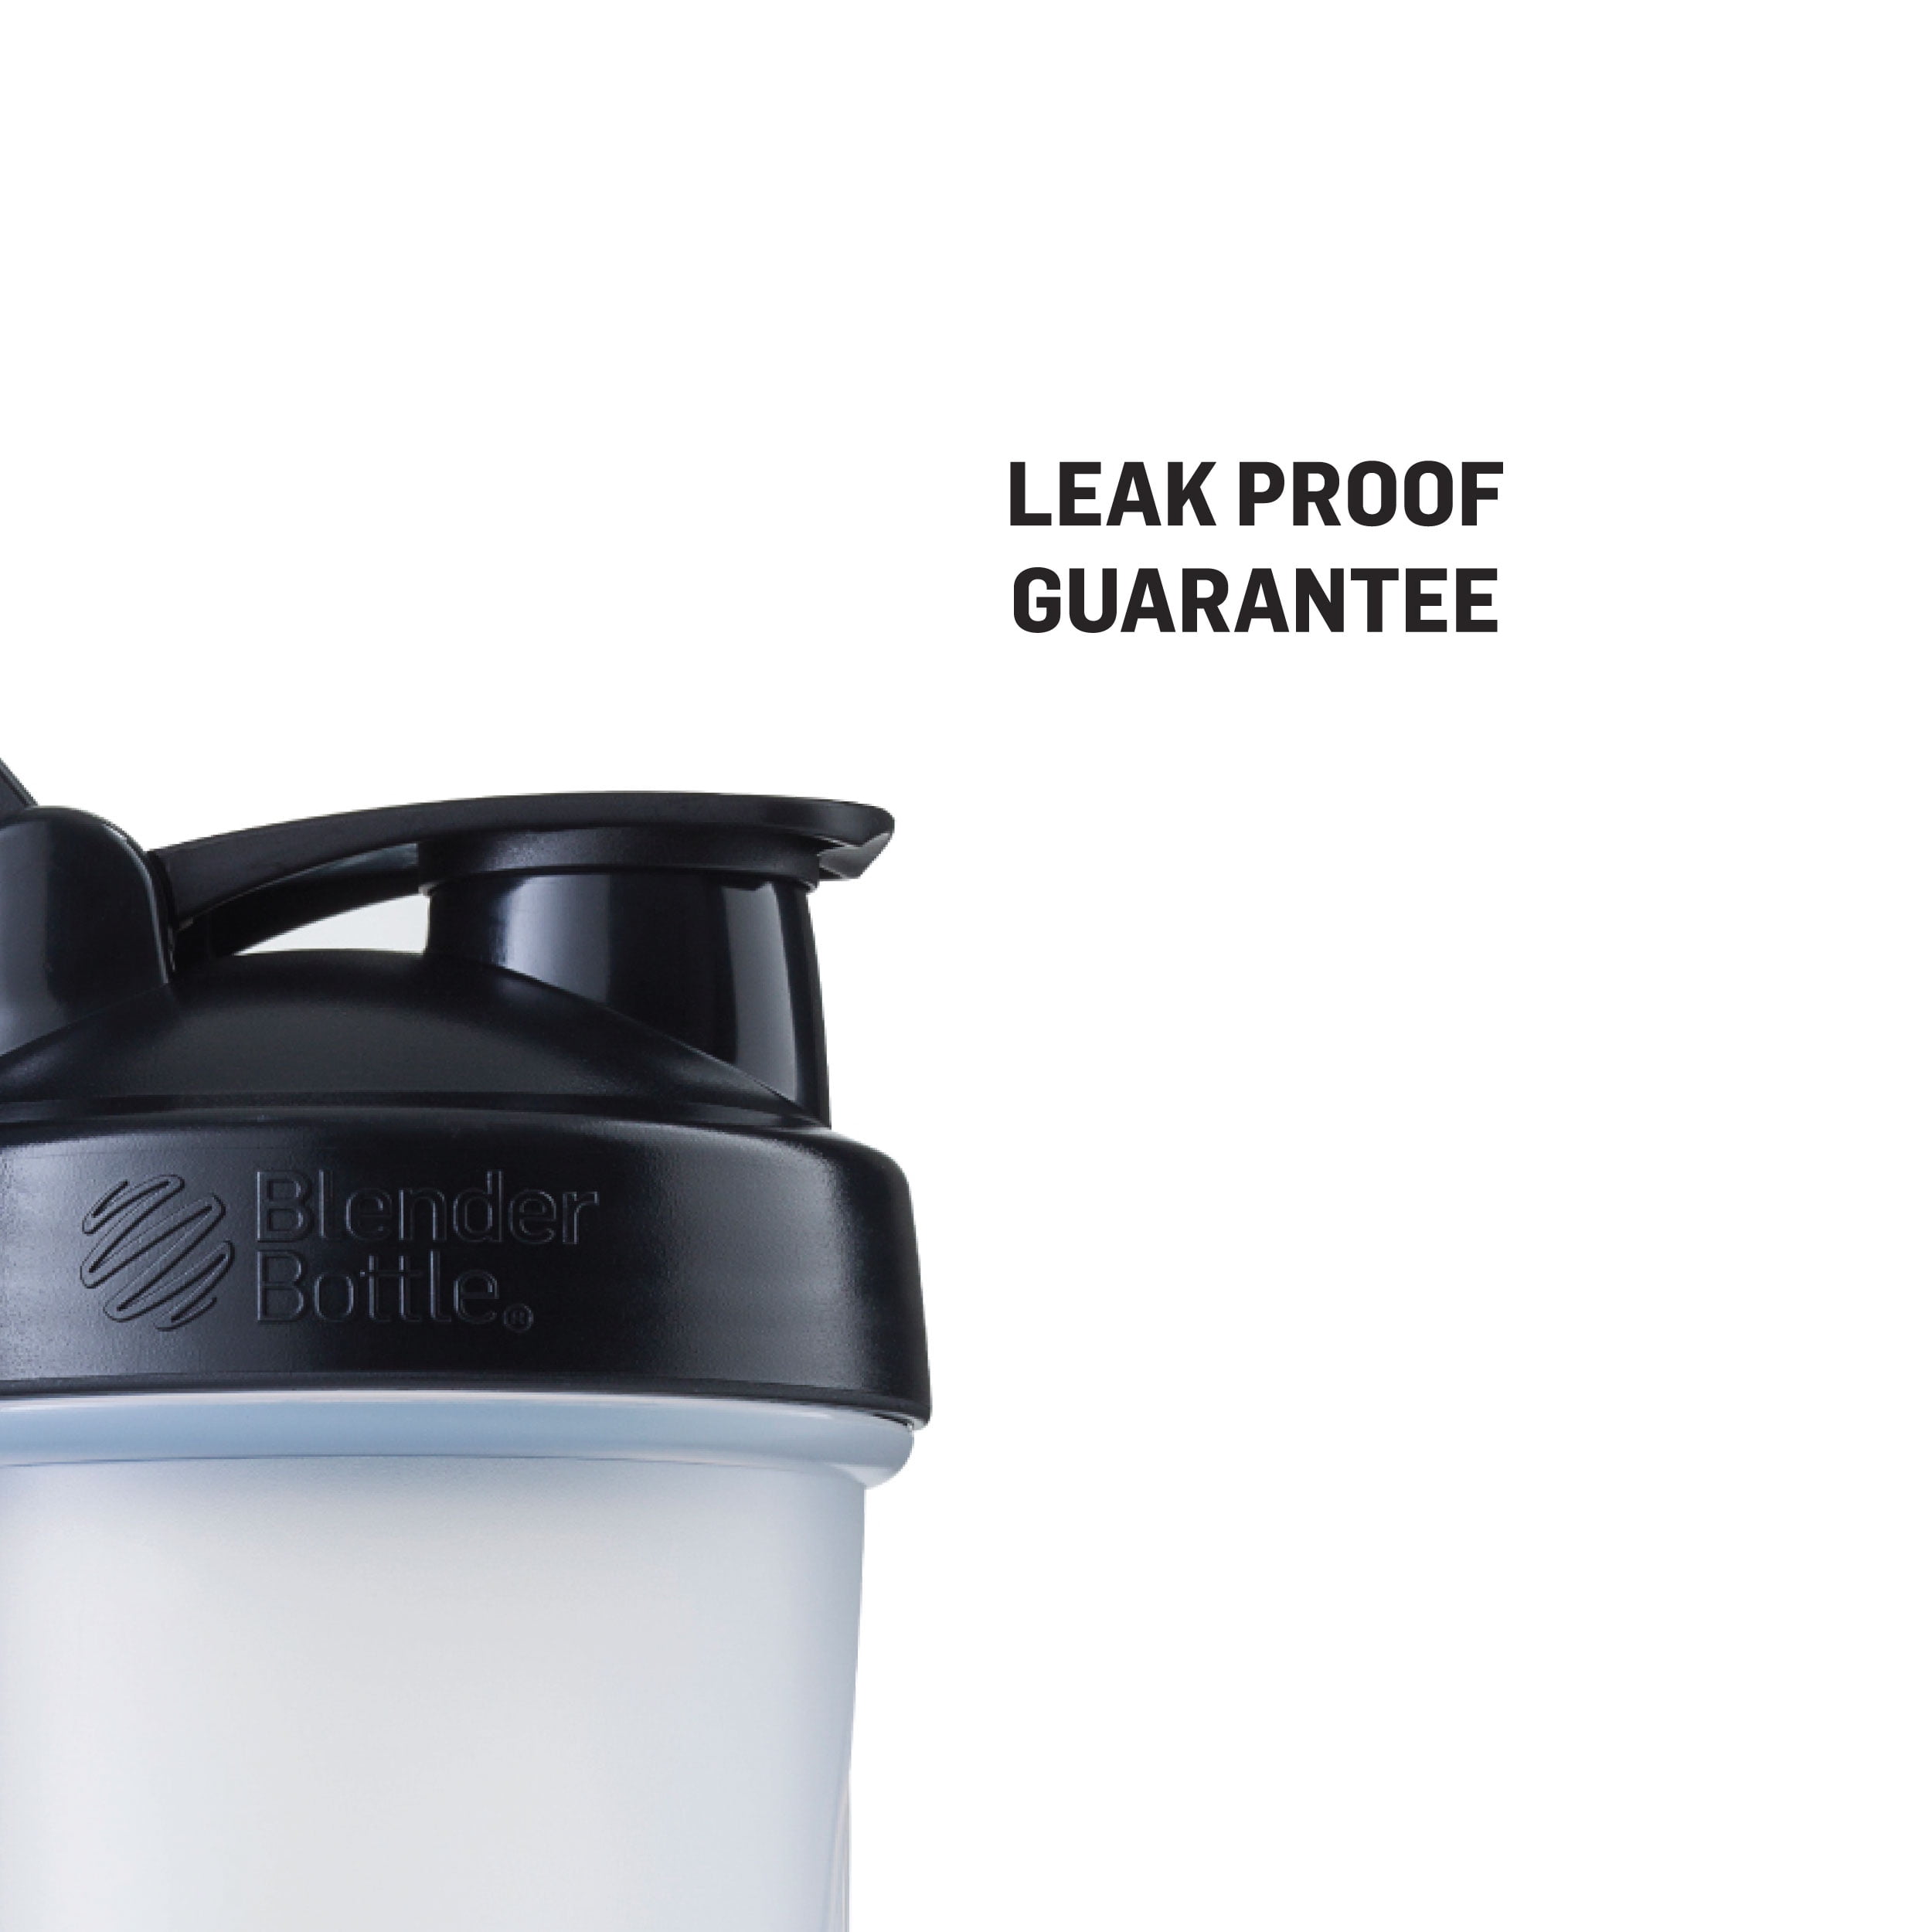 FS Classic Clear Shaker Cup – Funk Supplement Shop